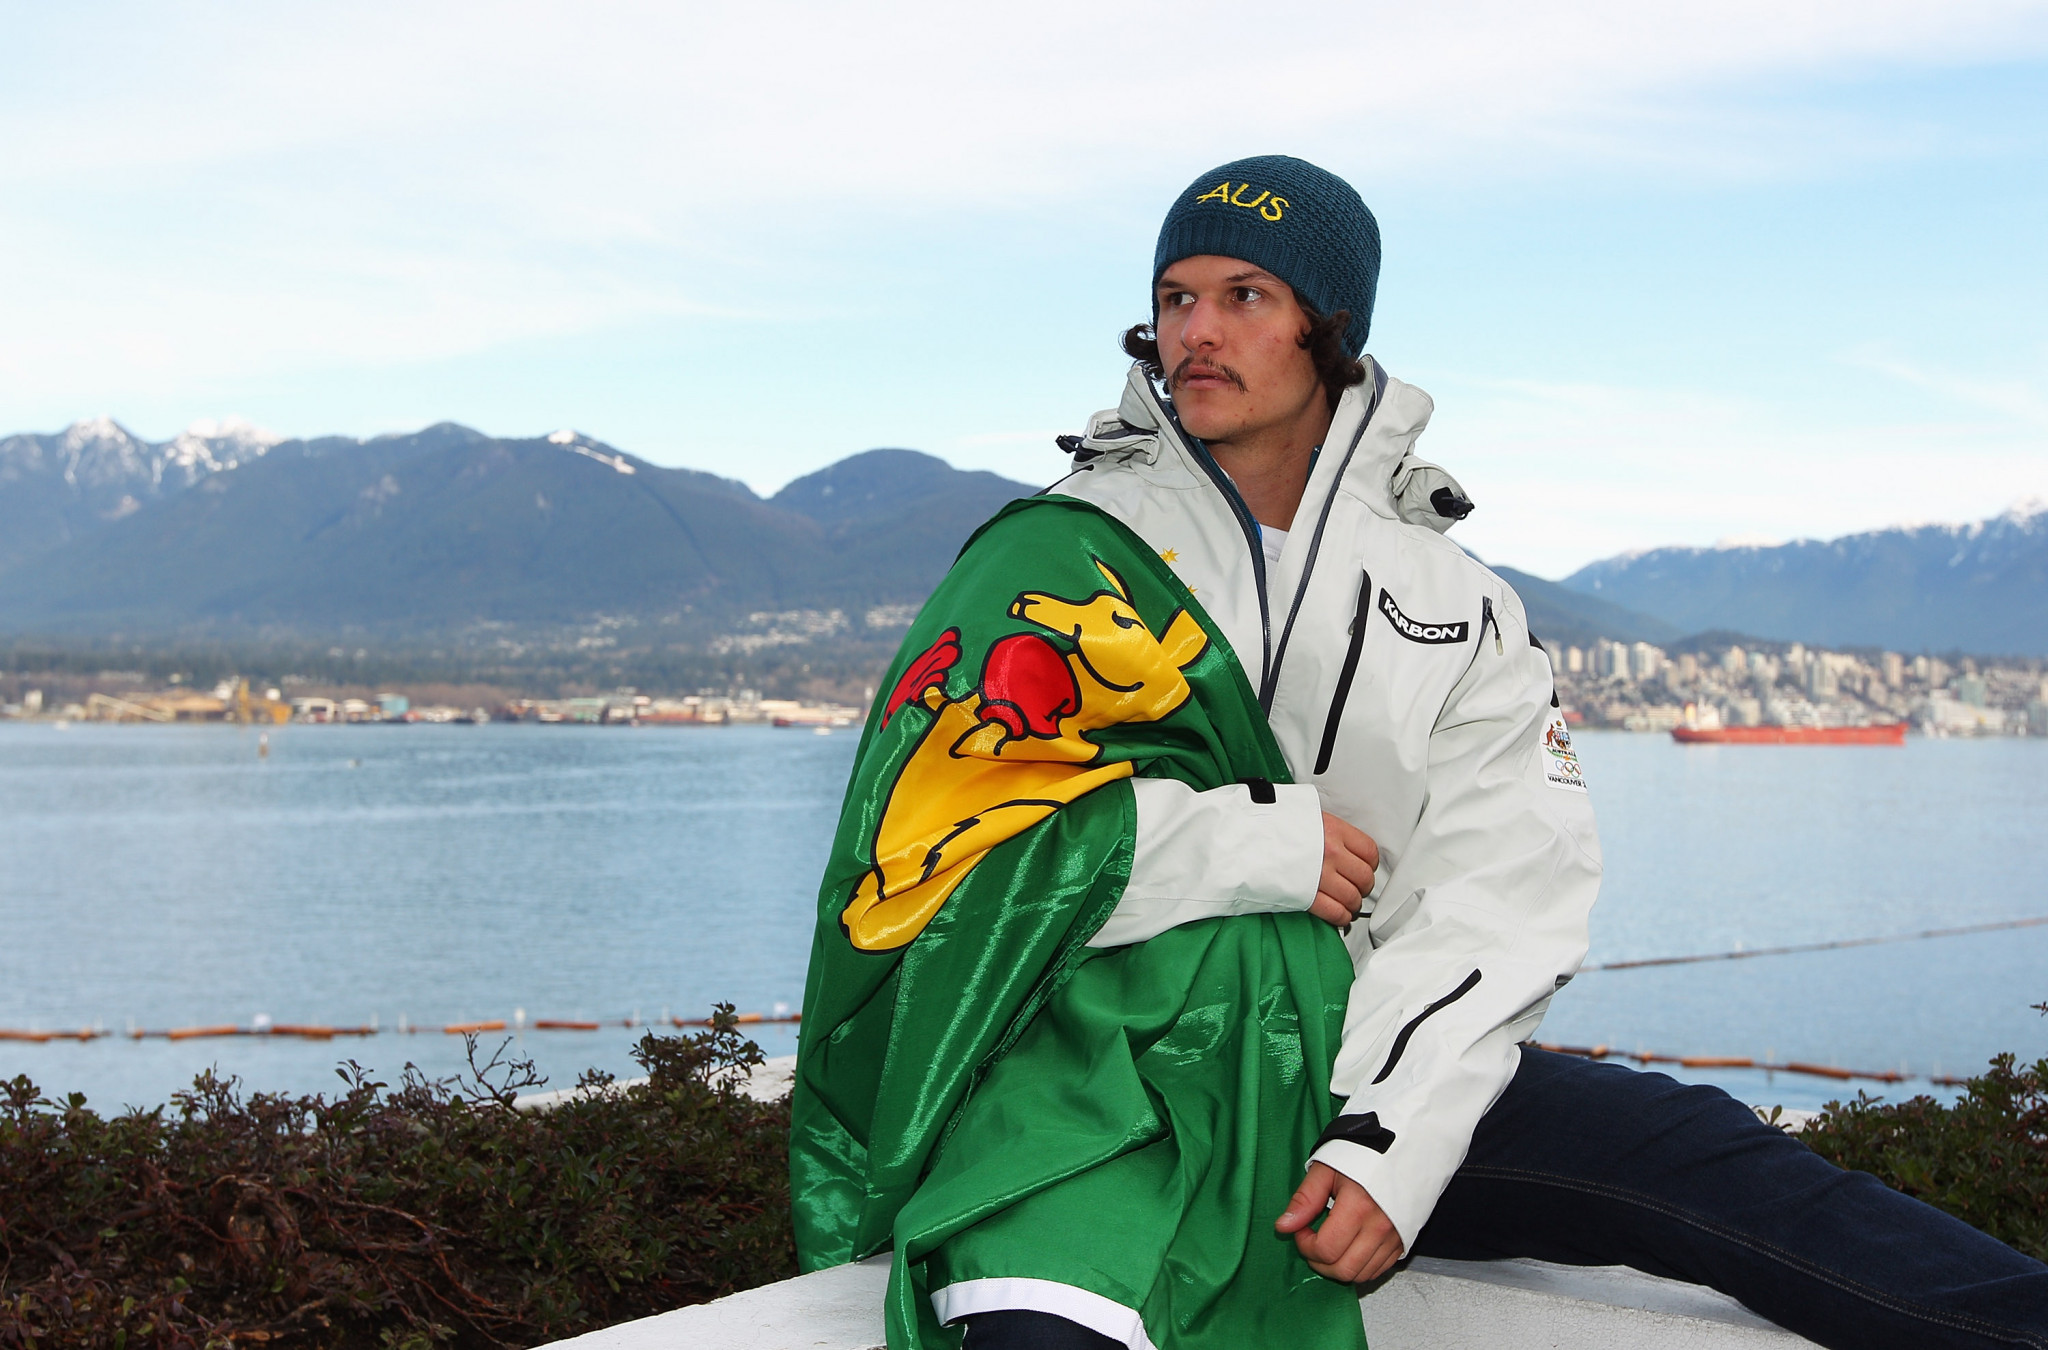 Ramone Cooper competed at the Vancouver 2010 Winter Olympics ©Getty Images